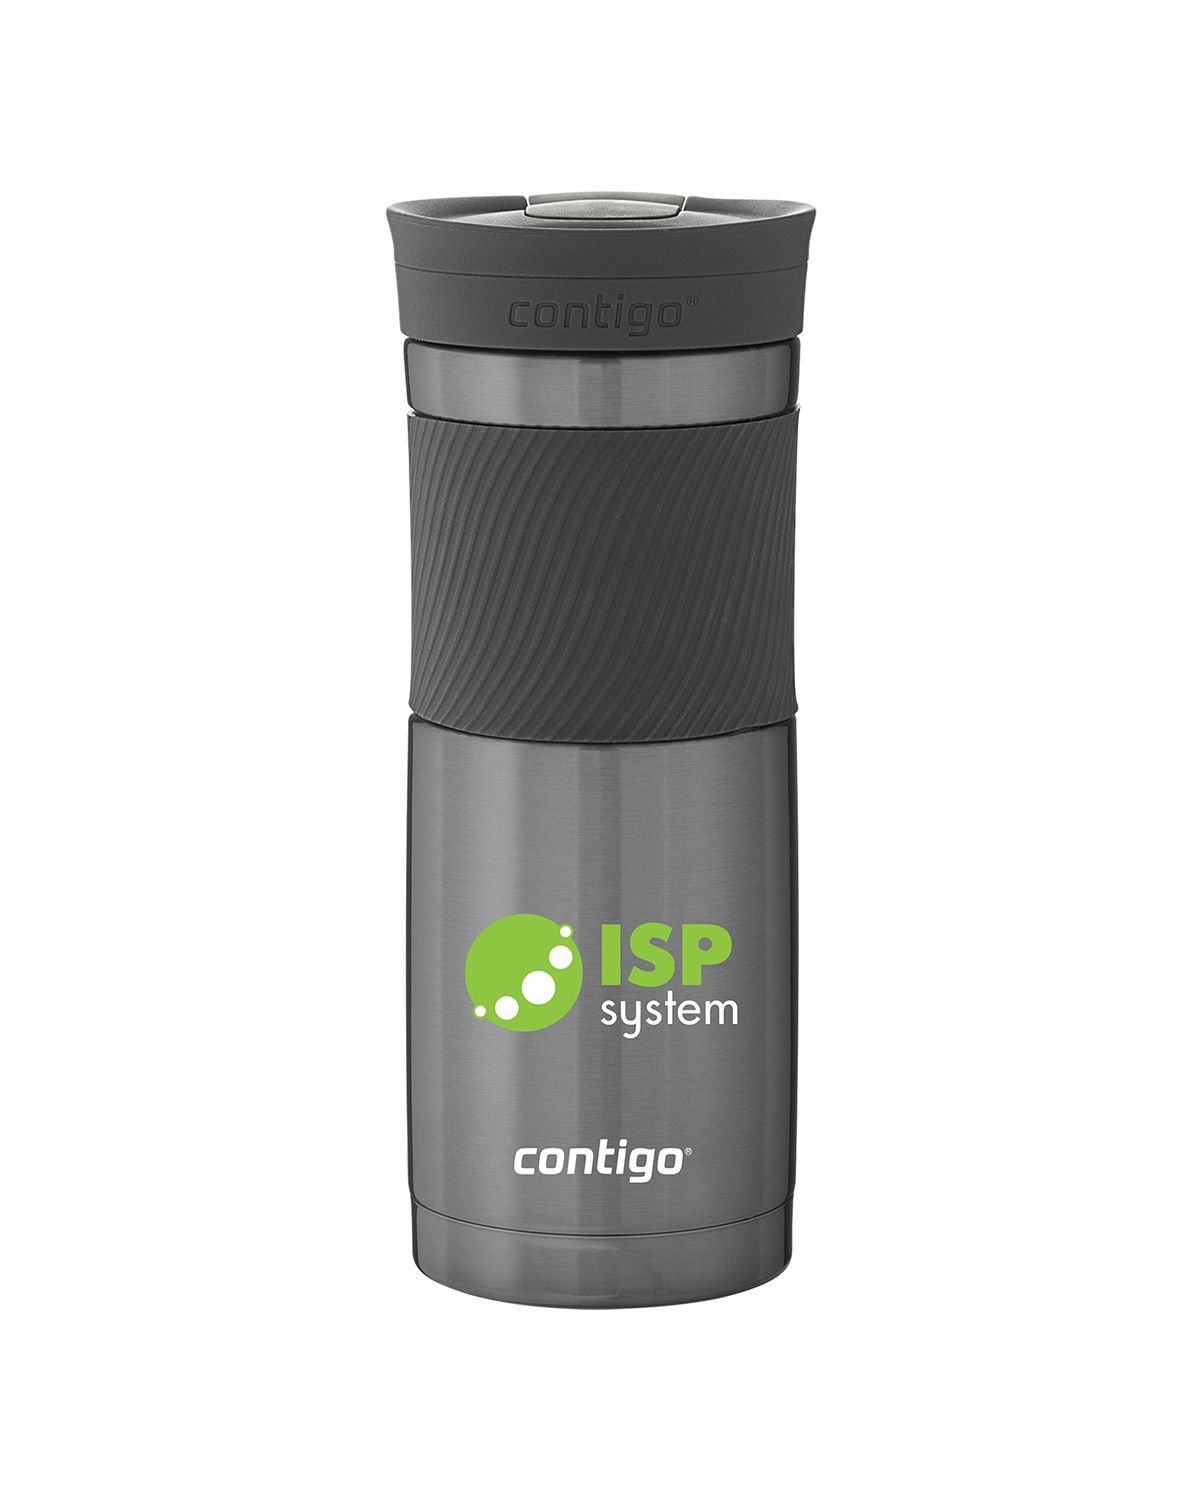 Custom Logo Laser Engraved Contigo Byron 2.0 20oz Double Wall Stainless  Tumbler, Silicone Grip, Snapseal Leak Proof Lid